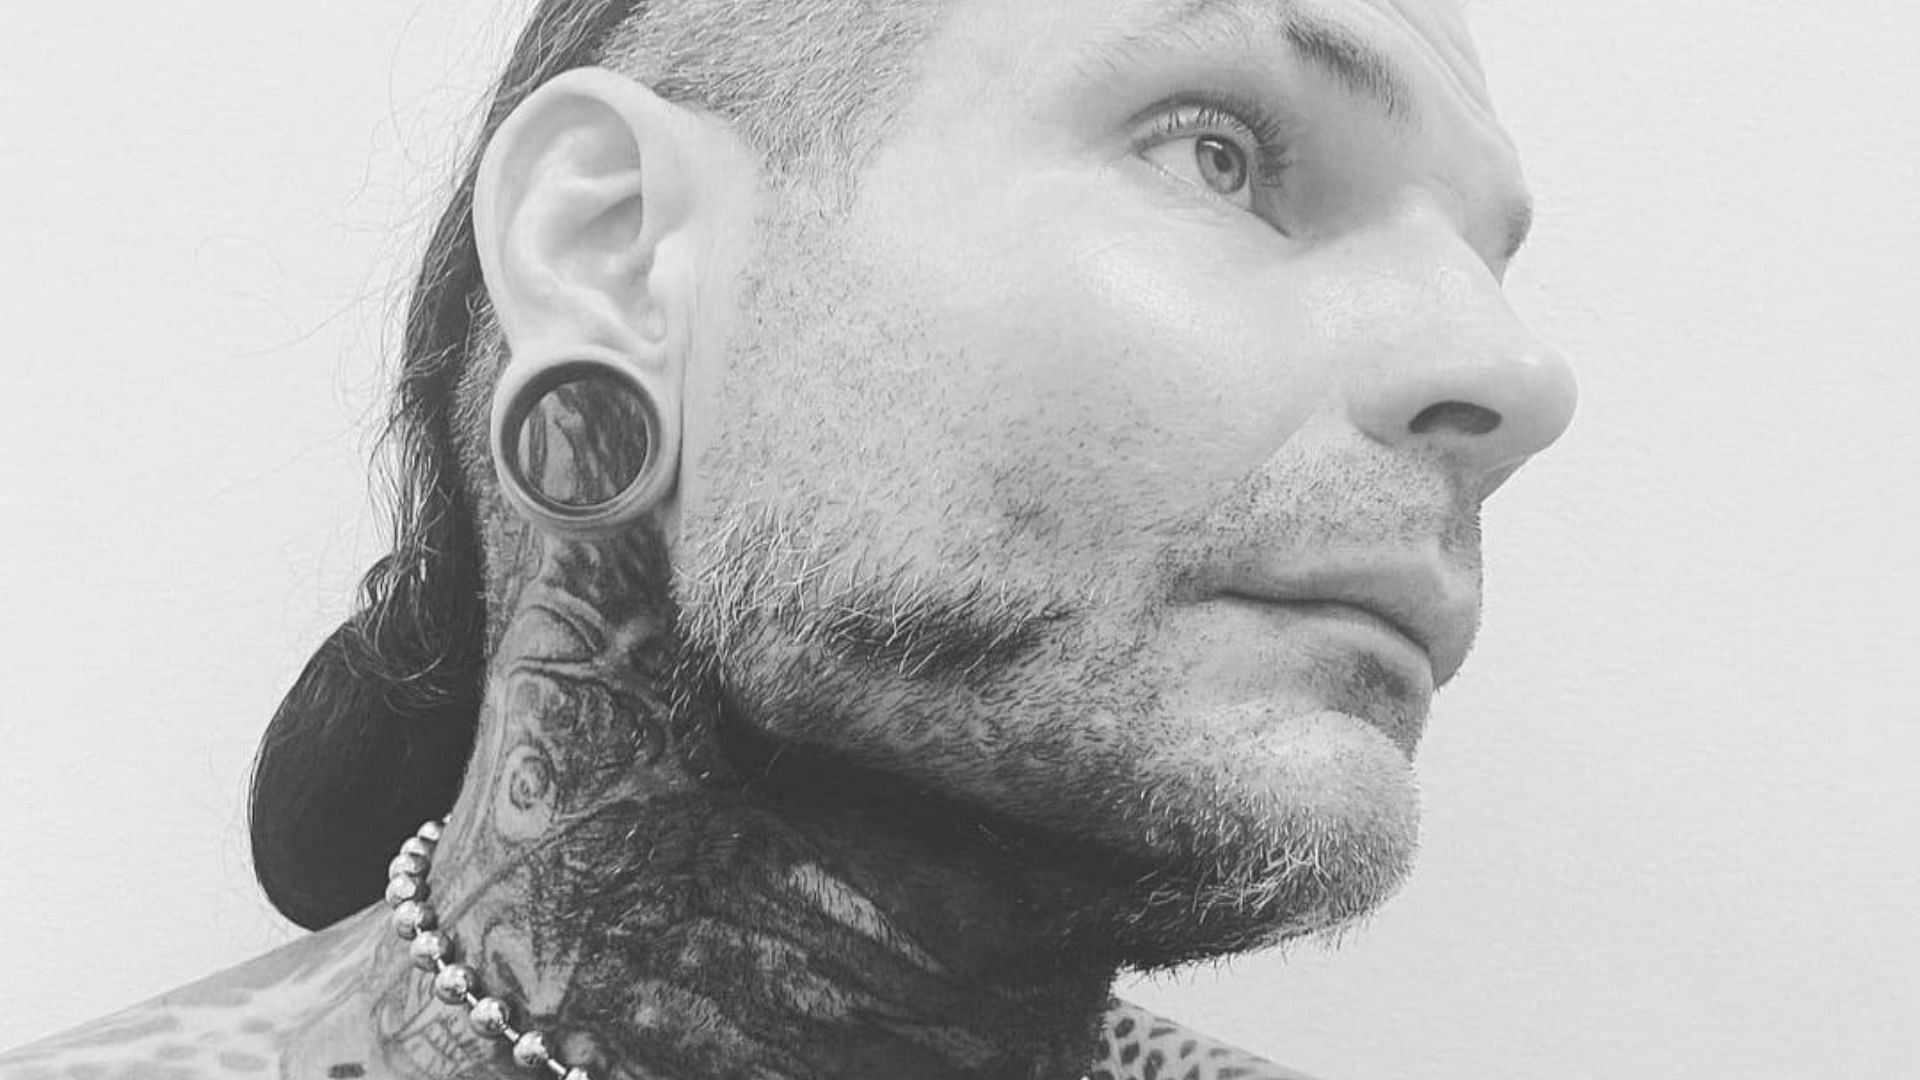 Jeff Hardy is one of the most beloved wrestlers of all time